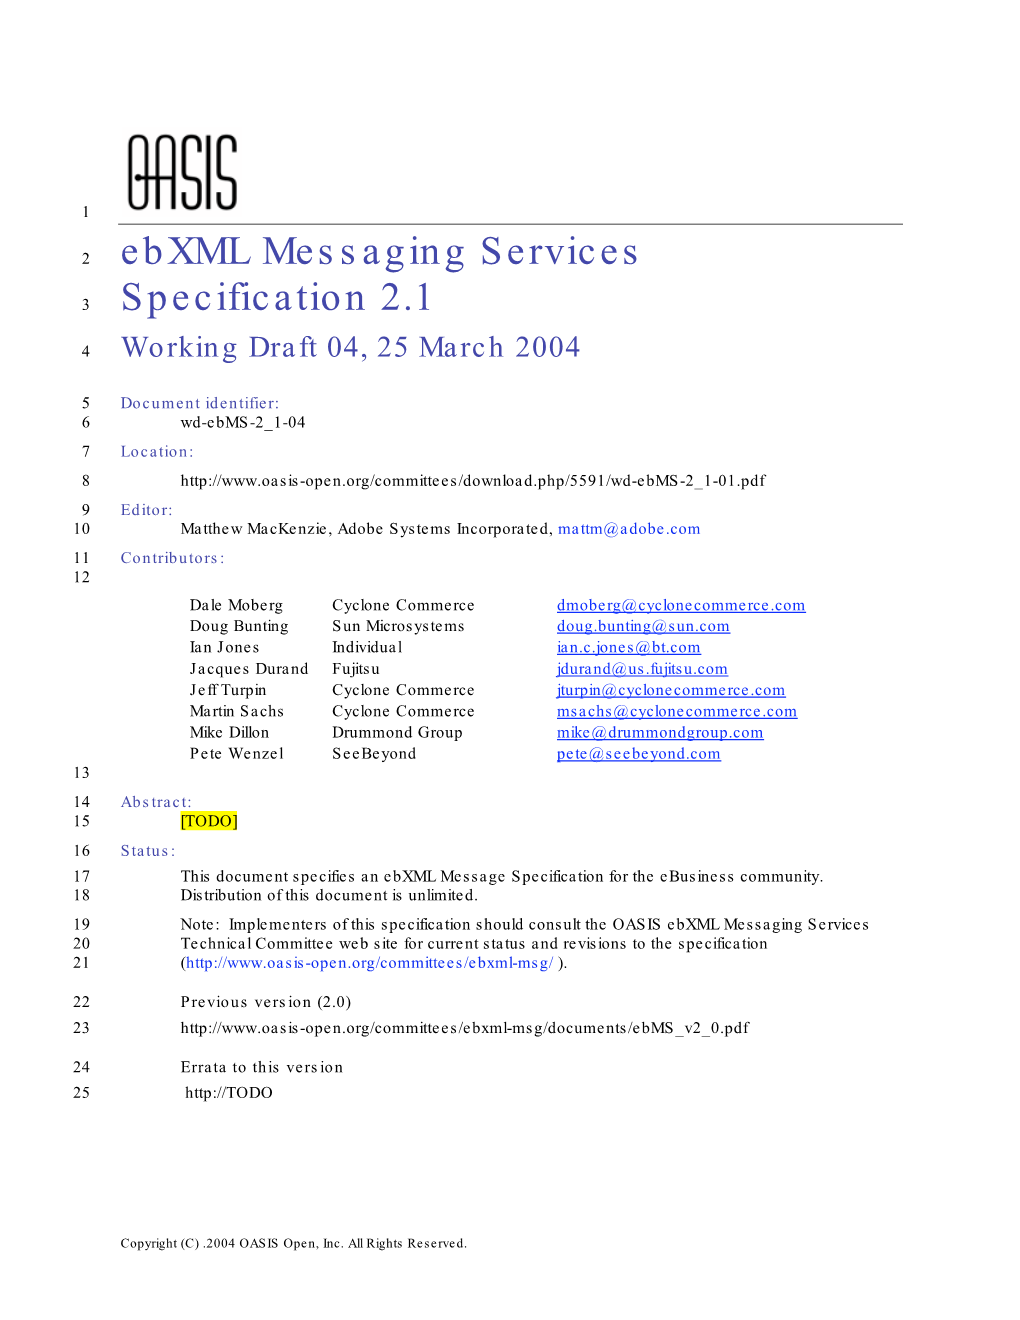 Ebxml Messaging Services Specification